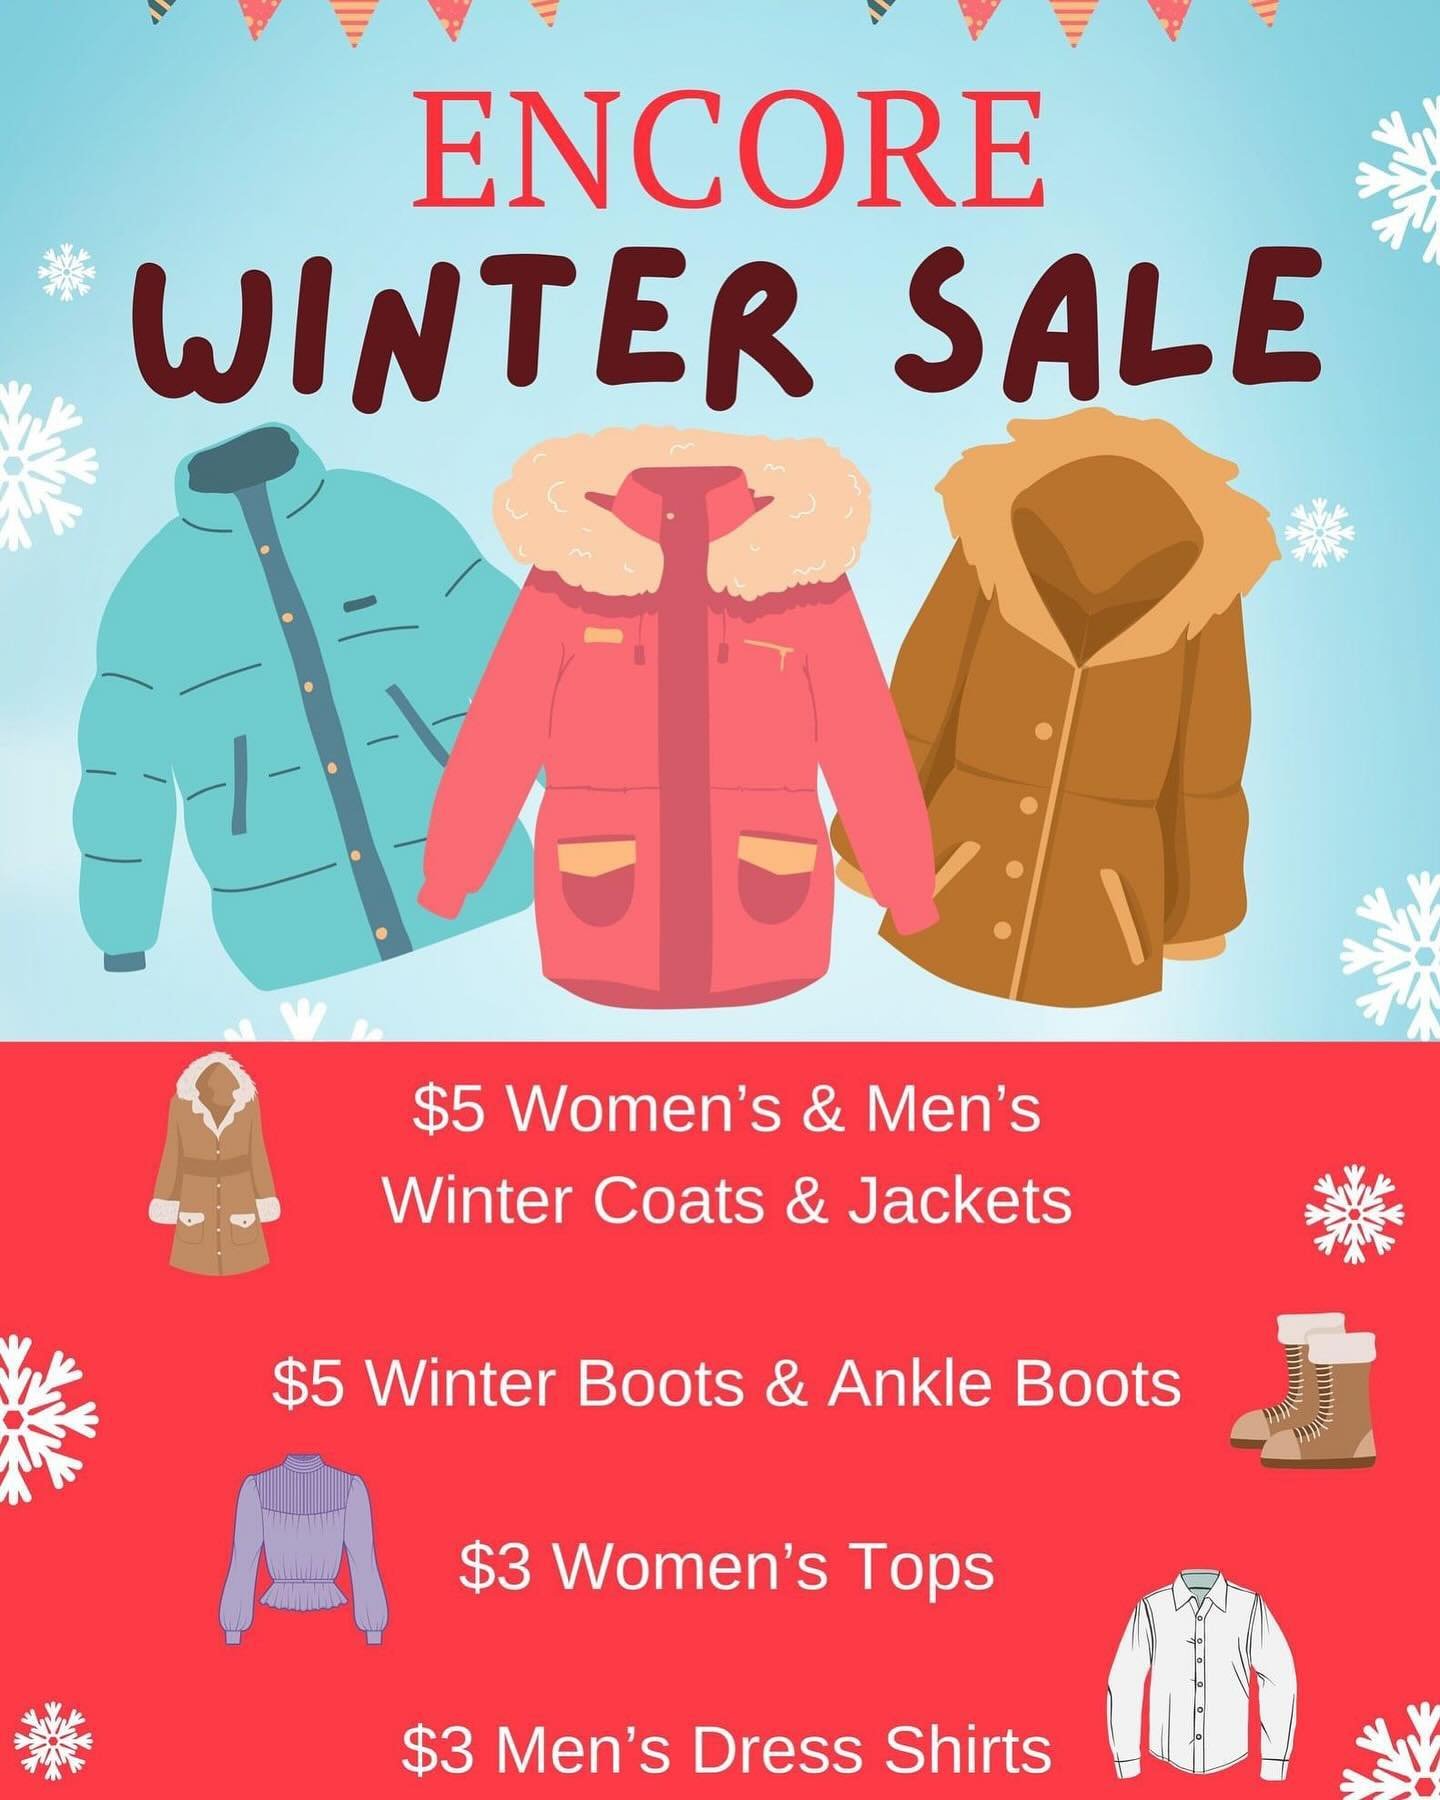 Come and check out Encore&rsquo;s BIG Winter SALE! We have a wide variety of Winter Coats and Jackets, Boots, and Ankle Boots for both Men and Women priced at ONLY $5! In addition, we have Selected Women&rsquo;s Tops and Men&rsquo;s Dress Shirts on S